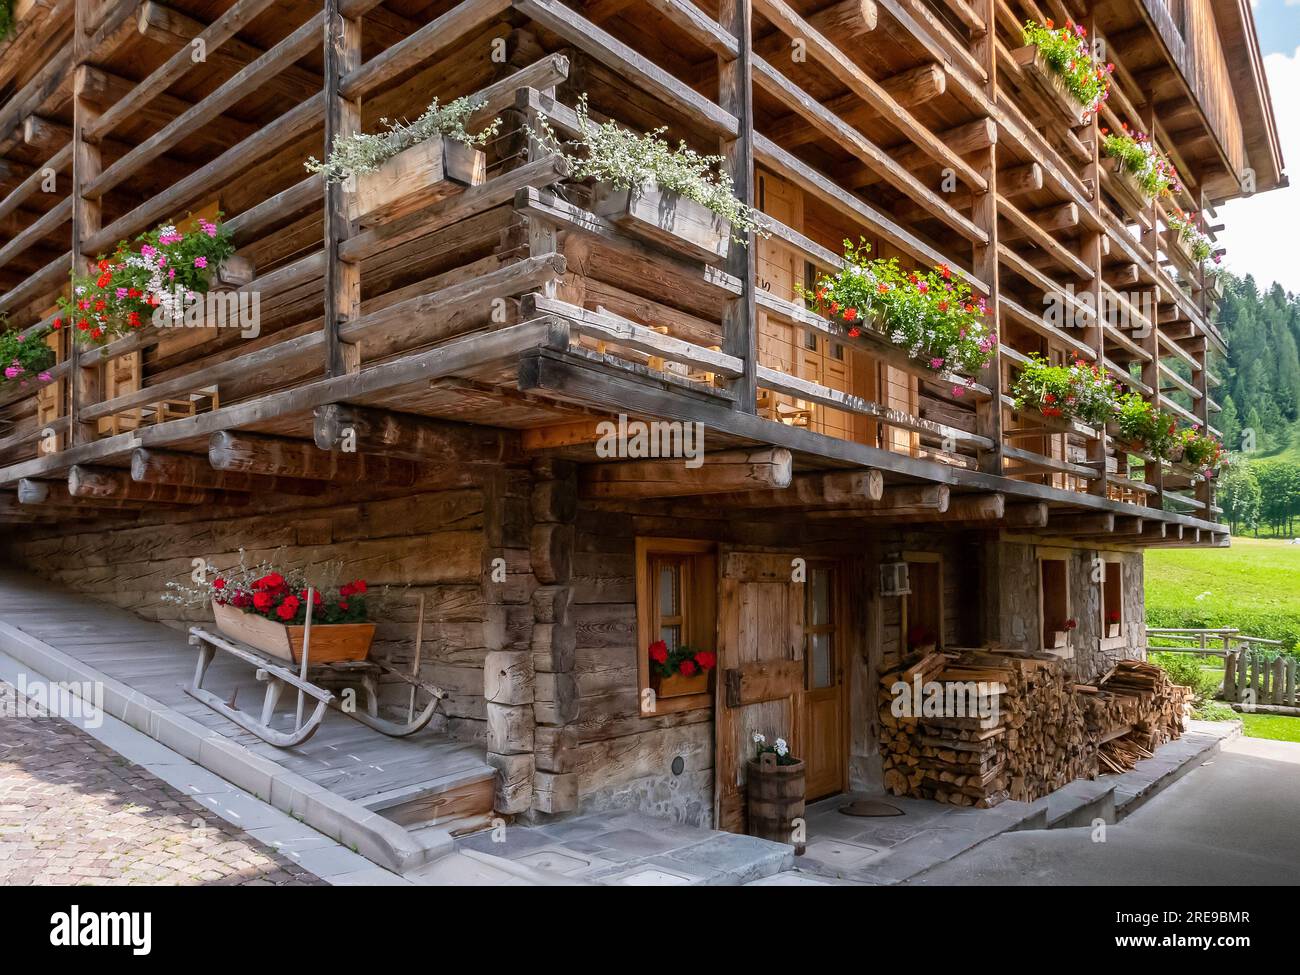 Details of a typical wooden house in the alpine town of Sauris, in Italy Stock Photo